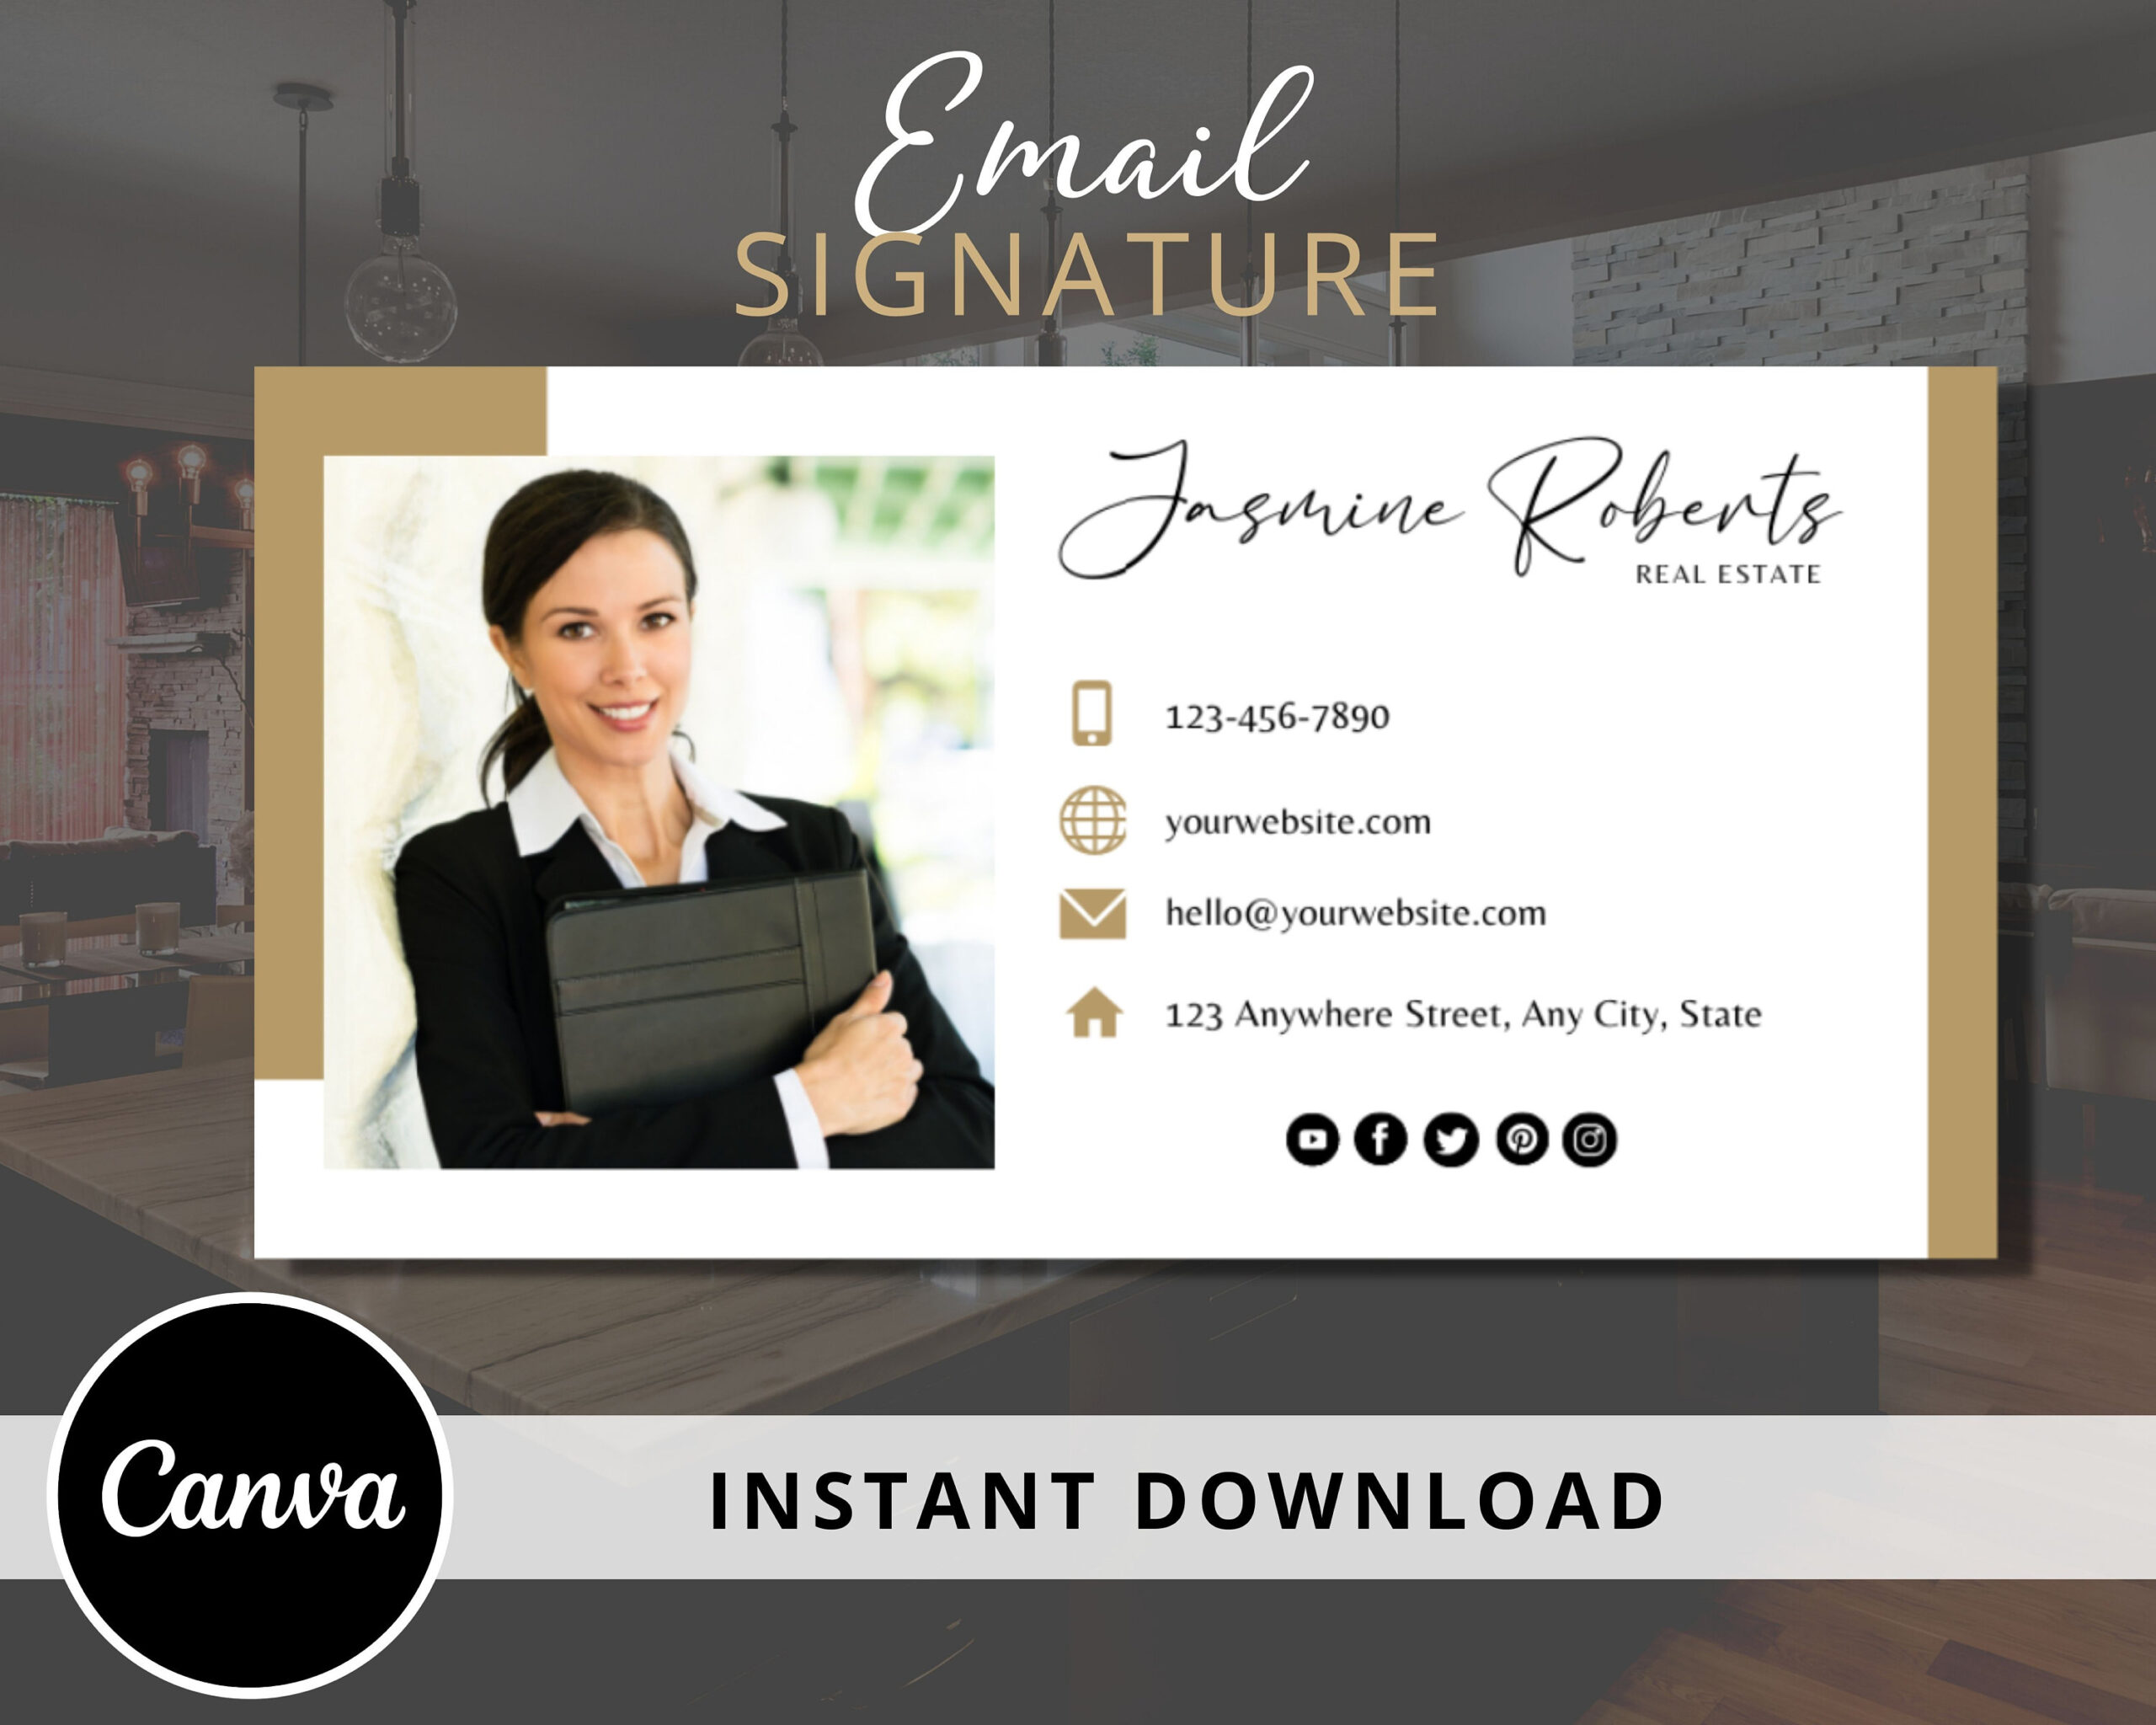 DIY Email Signature Template for Real Estate Agents -  Email Footer Design - Fully Editable Canva Template - Instant Download